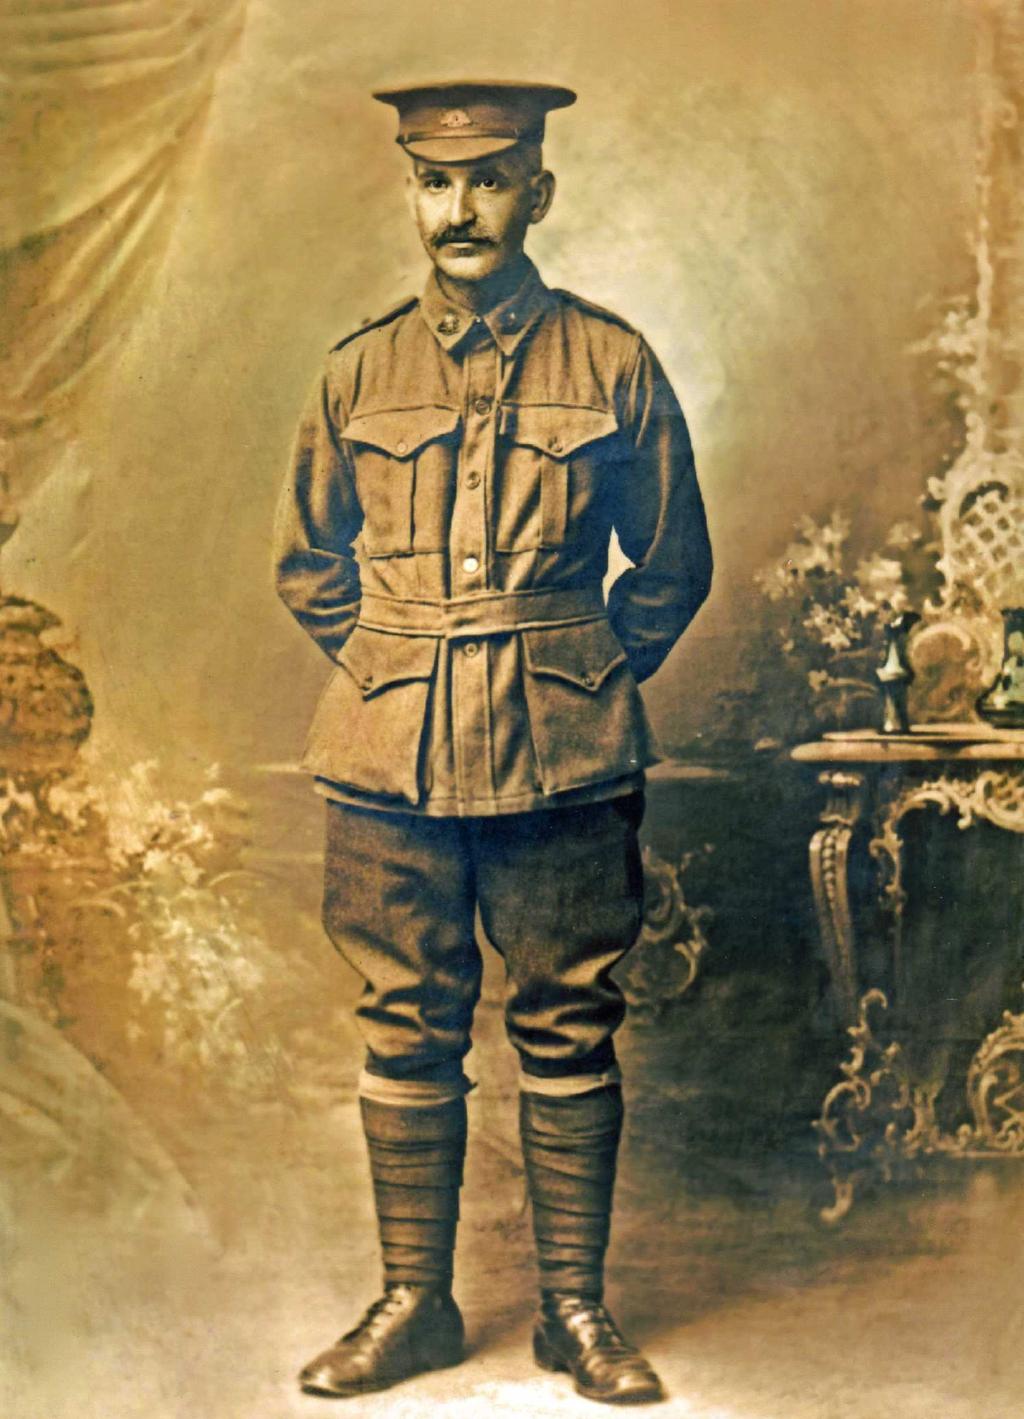 Private James Forbes (relative) No. 741 38th Battalion - aged 24 James was a farm manager from Werribee in Victoria & he enlisted into the AIF in Feb., 1916.